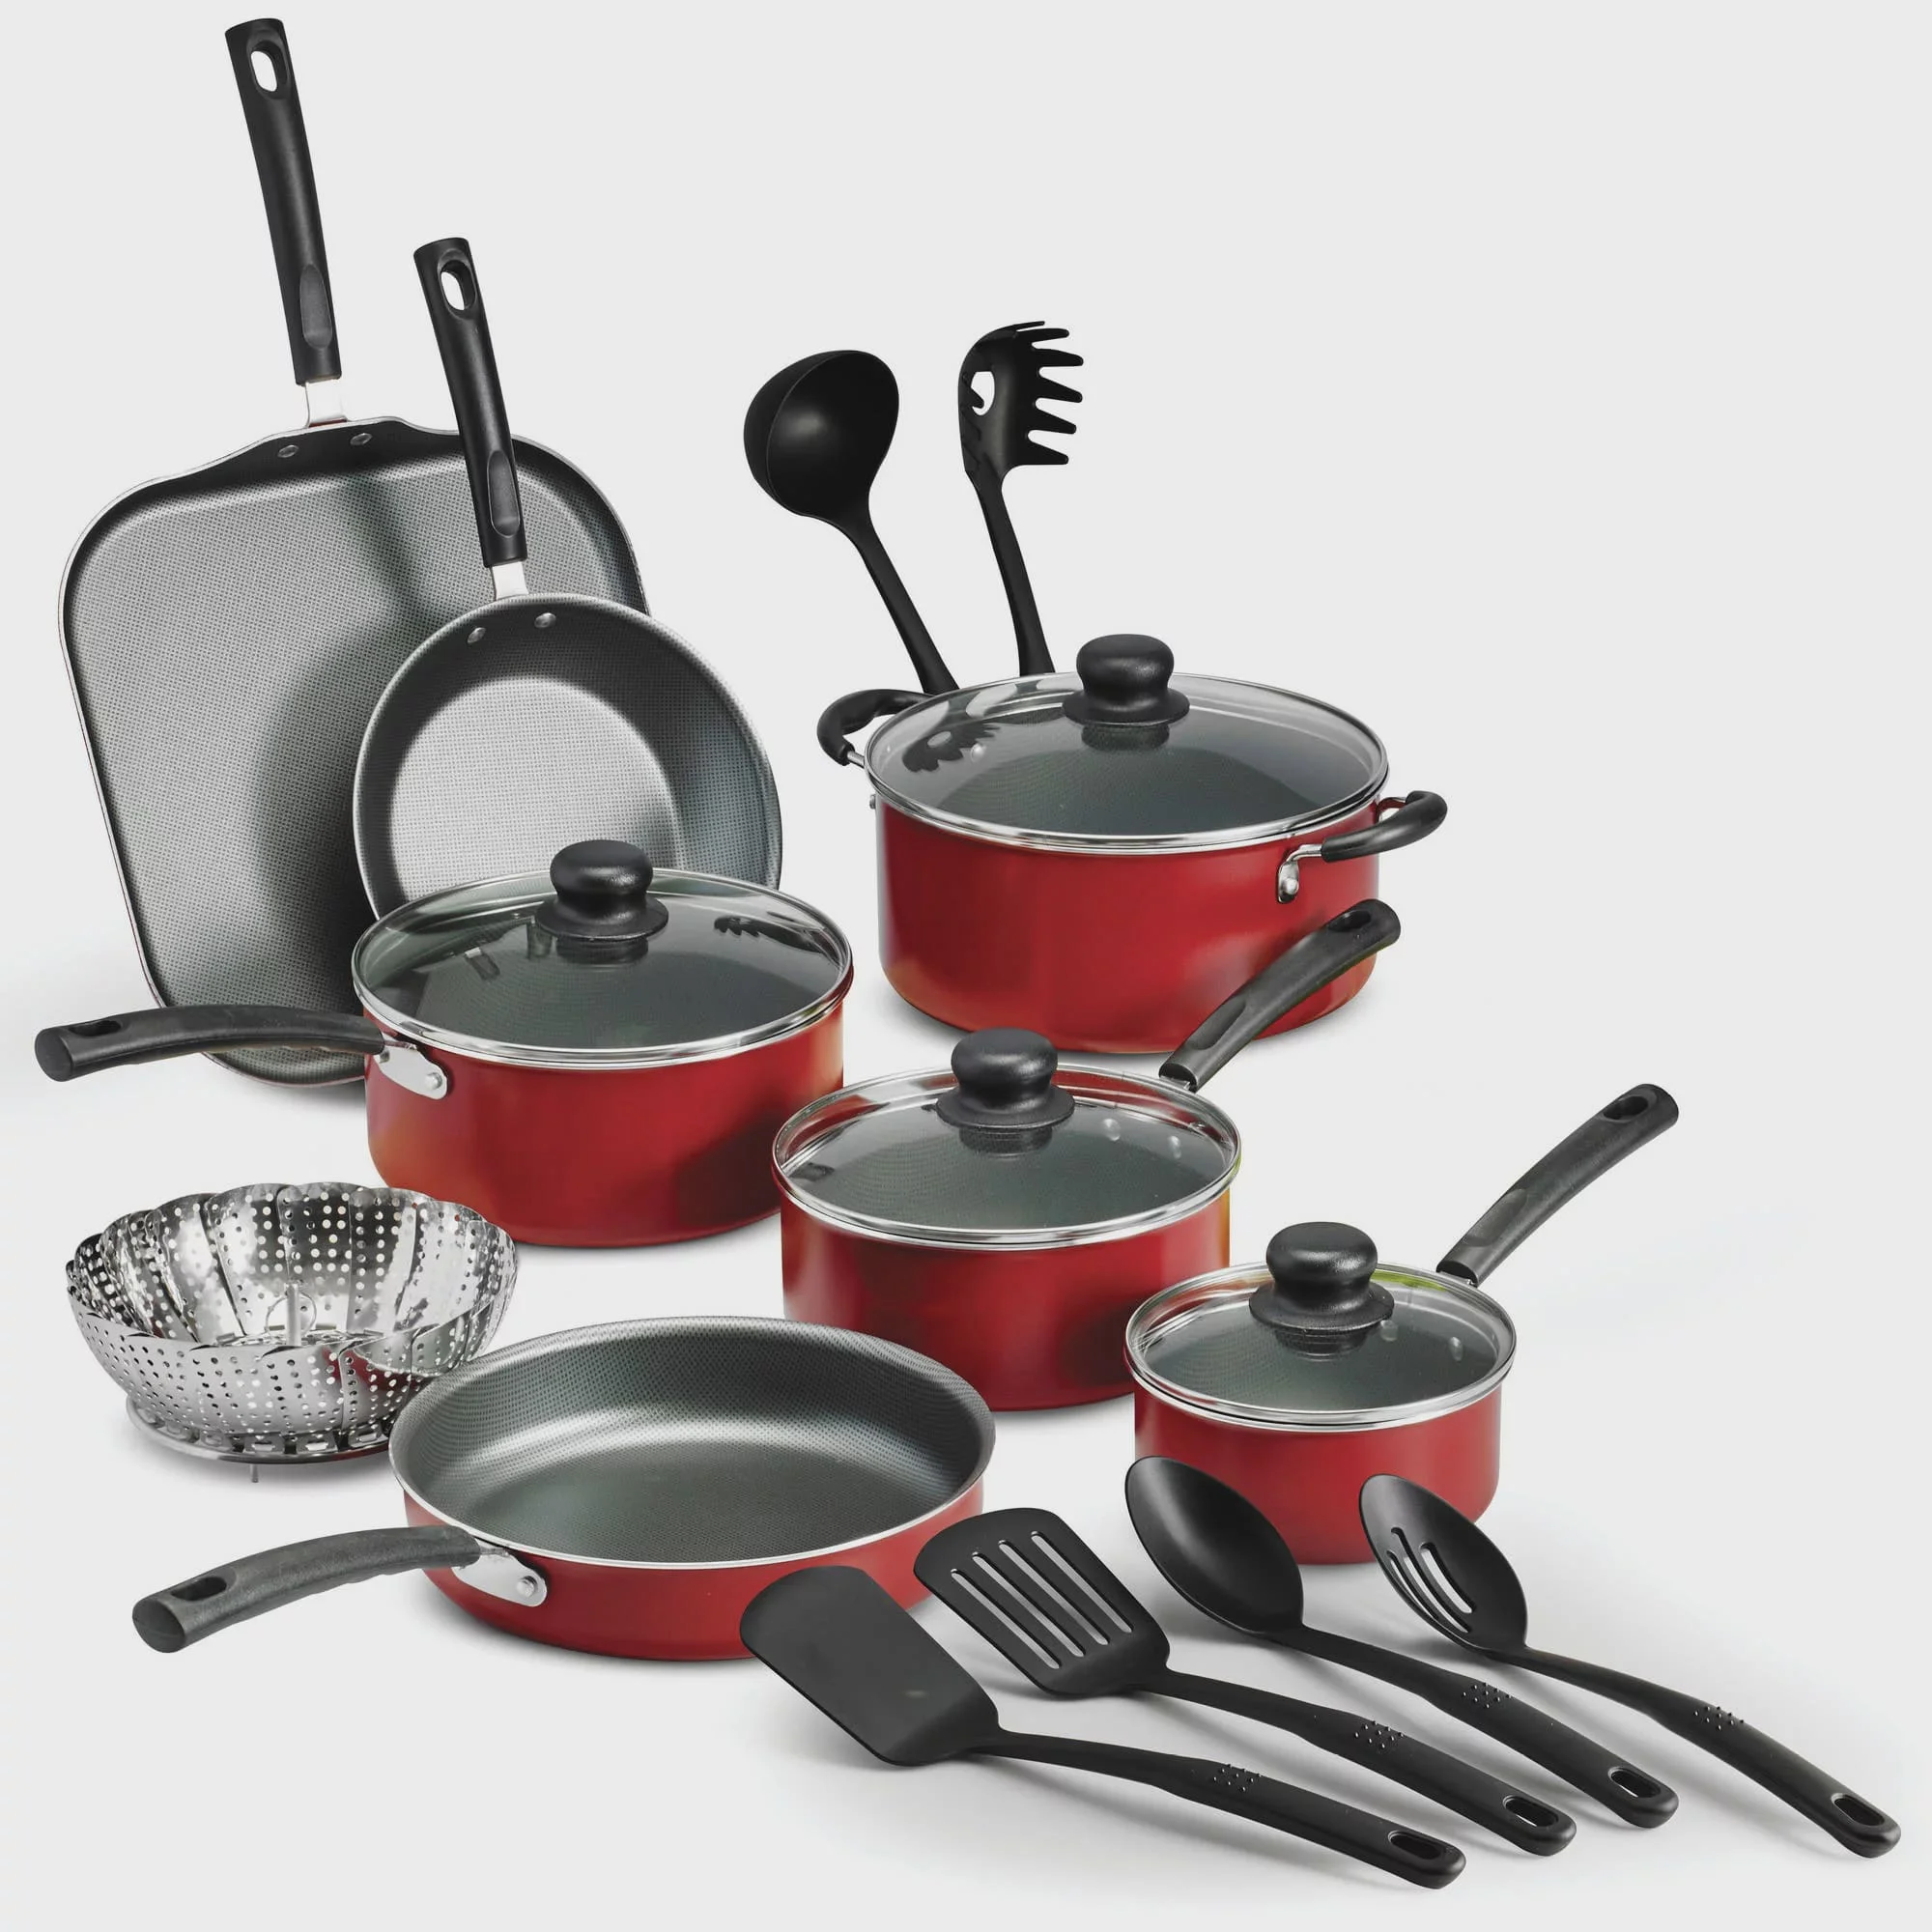 Primaware 18 Piece Non-stick Cookware Set, Steel Gray Cookware Sets Pots and Pans Kitchen